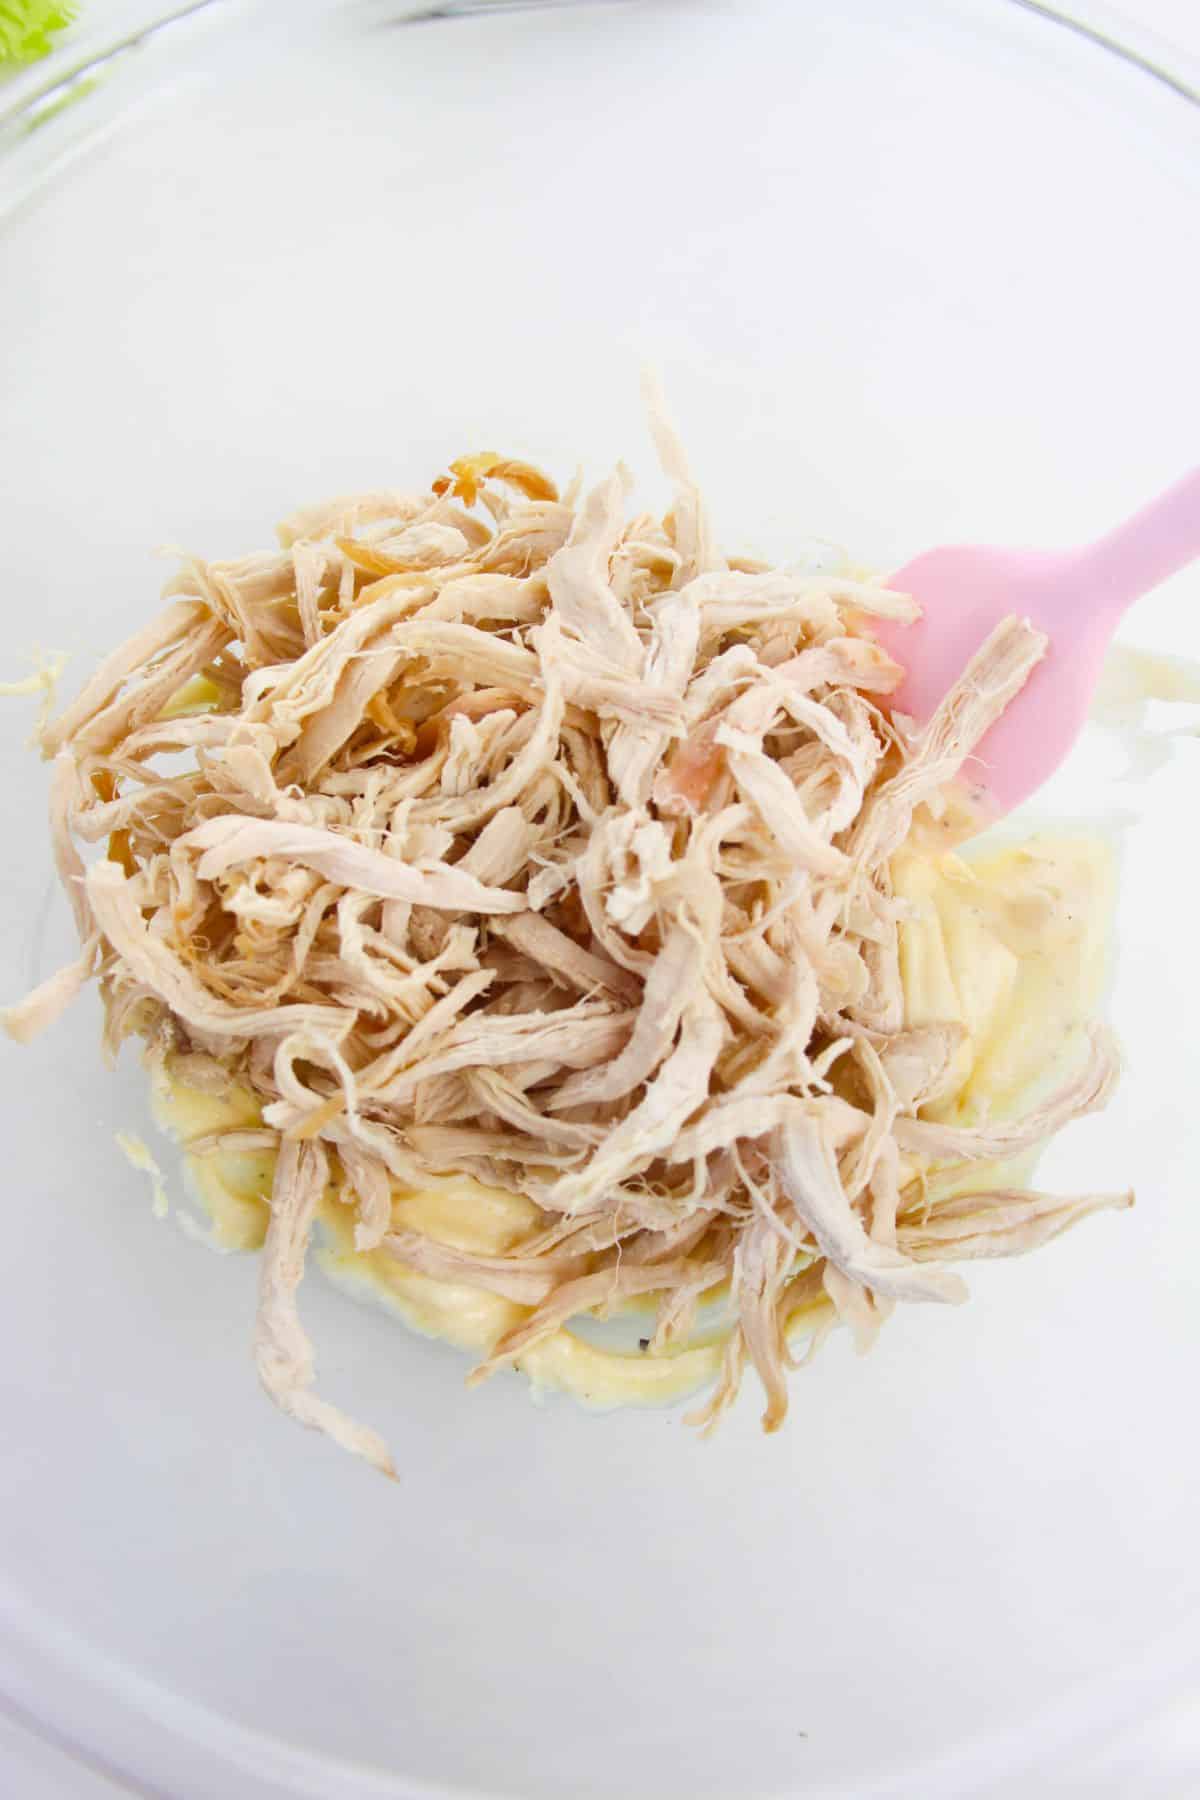 shredded chicken is added to the mixture in a large bowl with pink spatula.